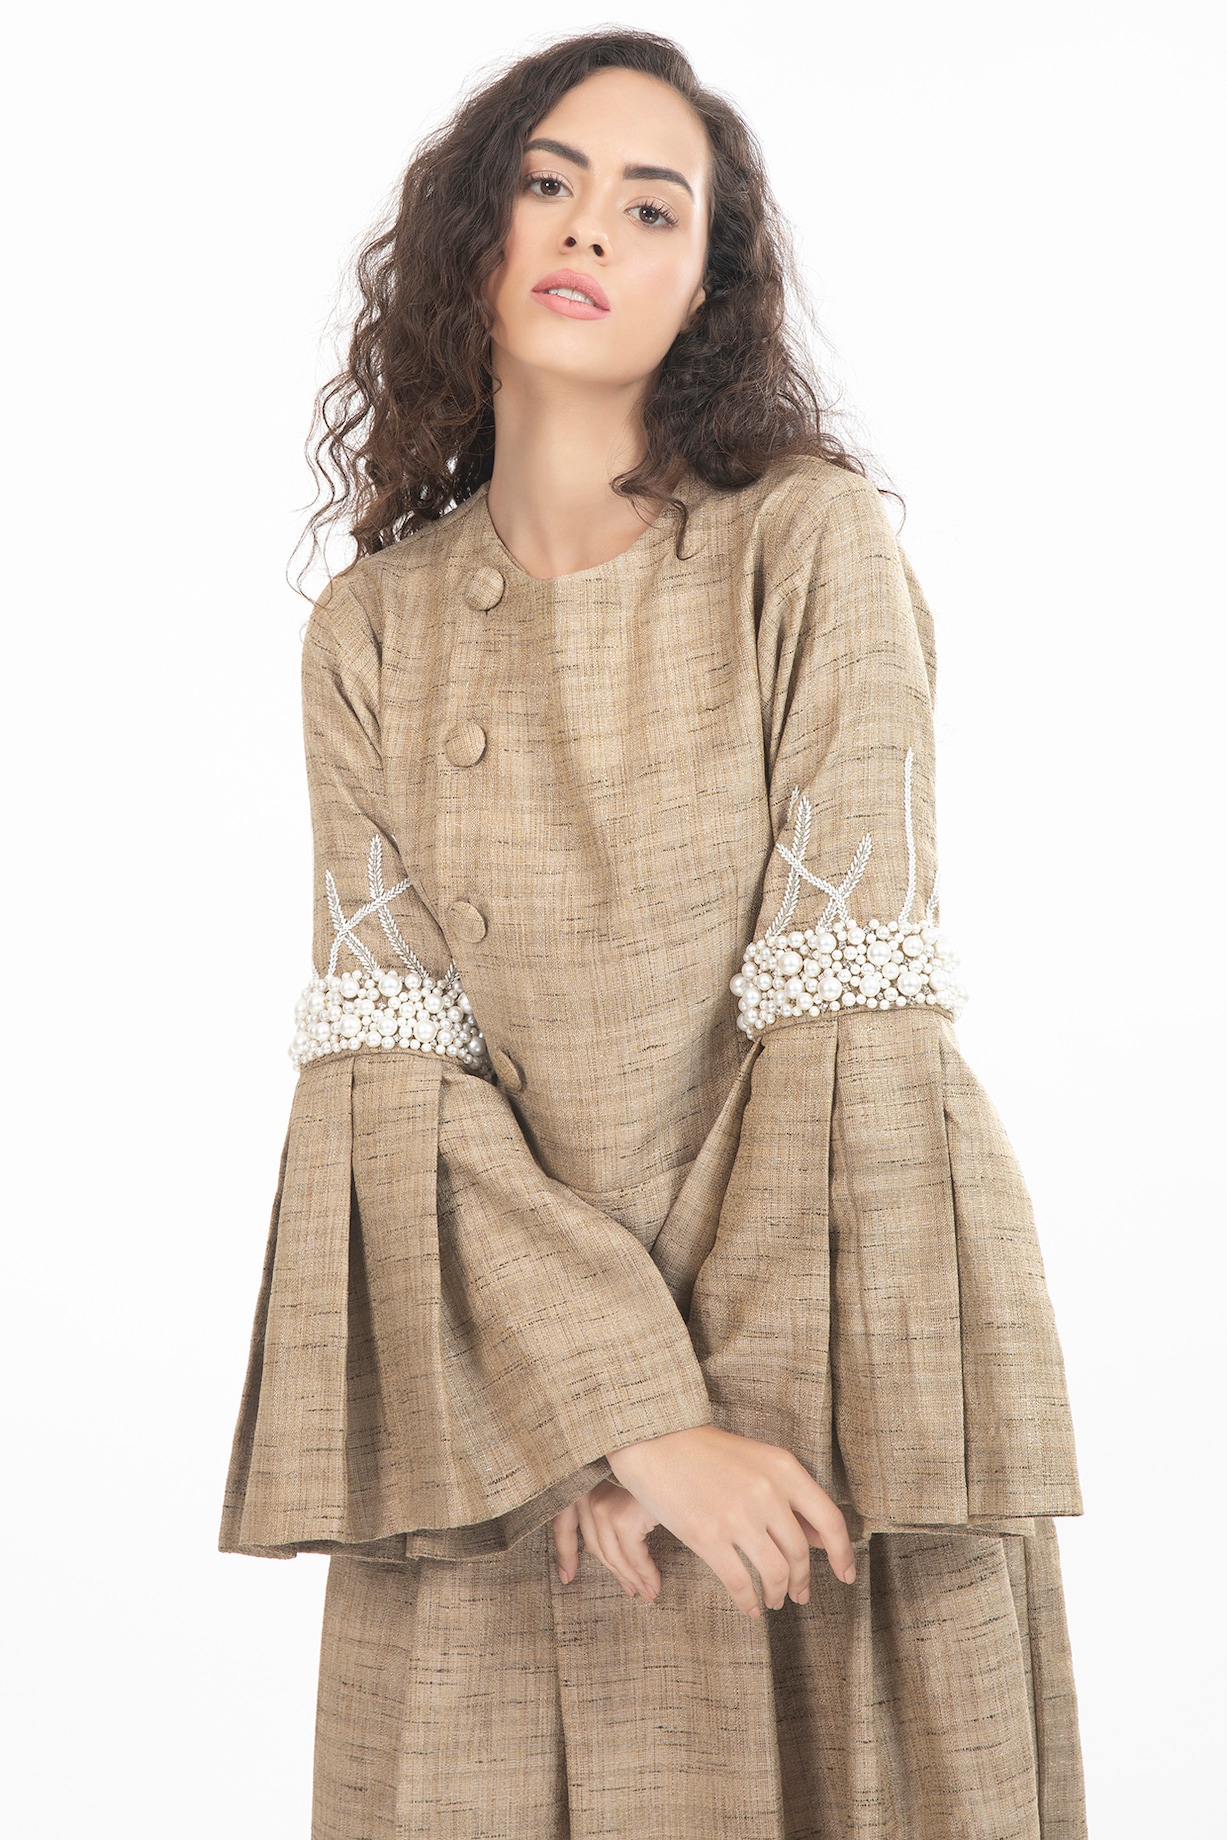 Macadamia Up Design House Beige 2024 Embellished Dress of THL by Jute Pernia\'s Shop at Pop